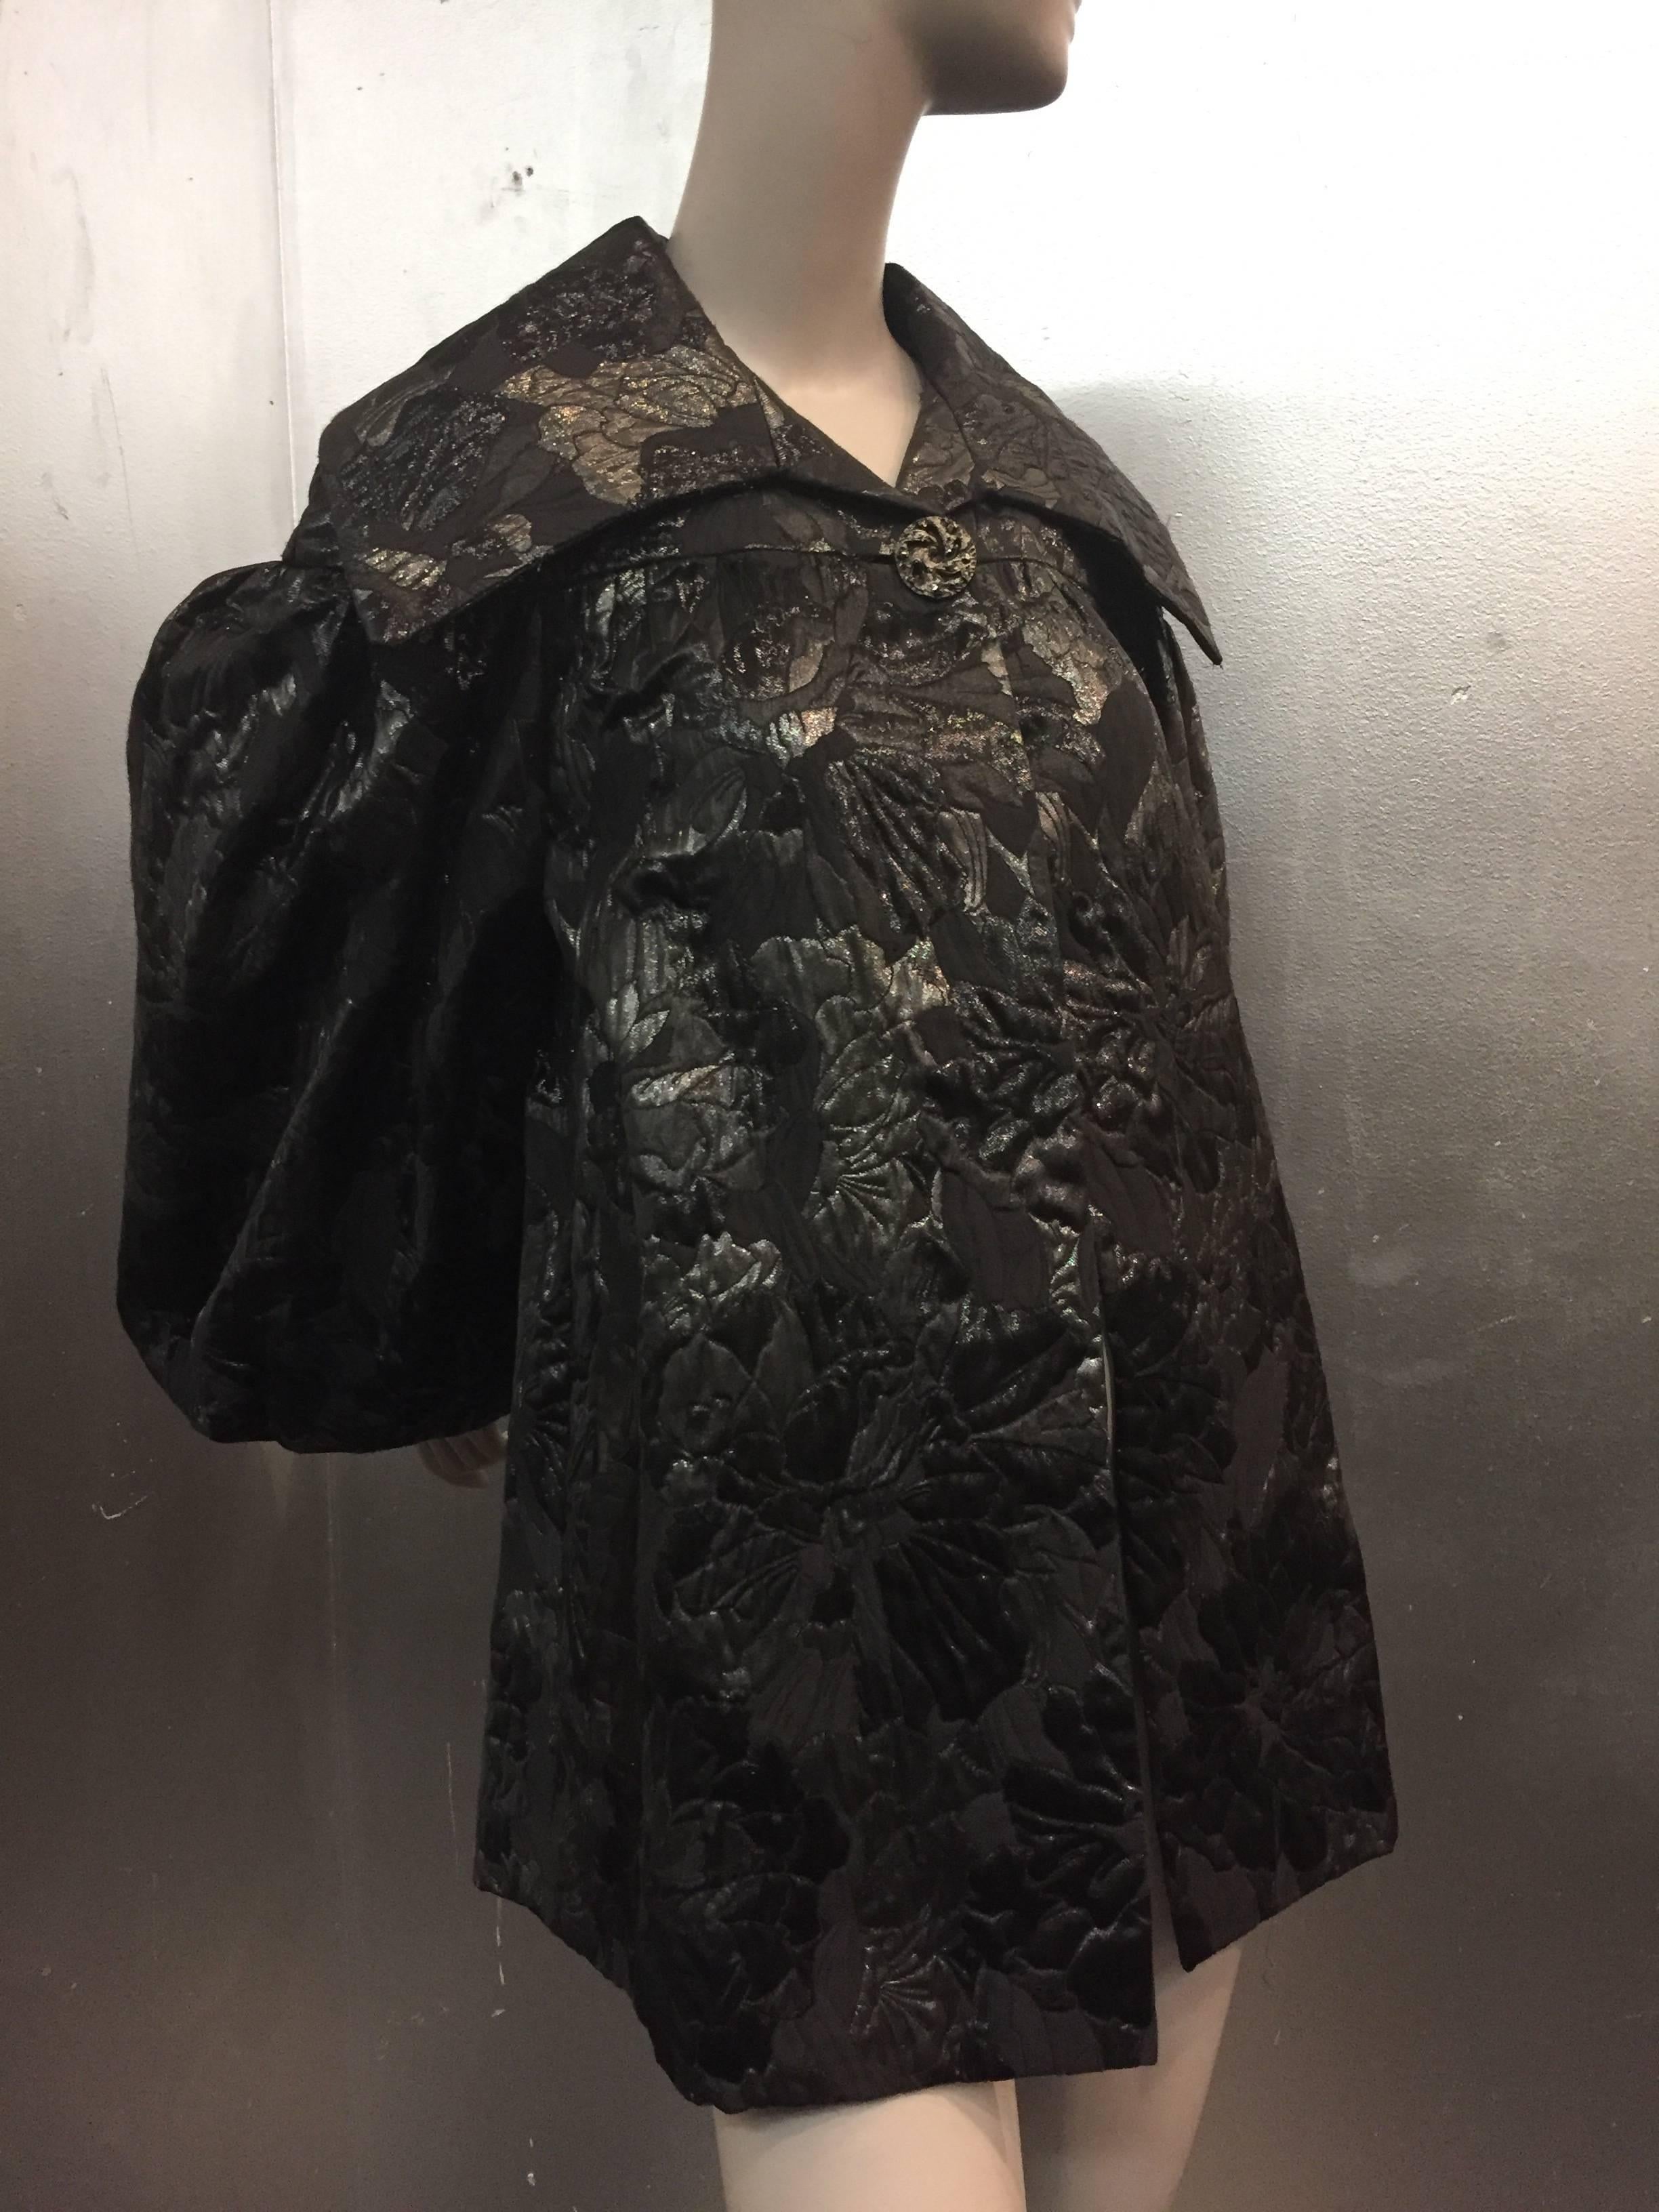 1980s Paul-Louis Orrier 1950s-inspired black and gunmetal brocade swing coat with balloon sleeves.  Large single antique glass button at wide picture collar.